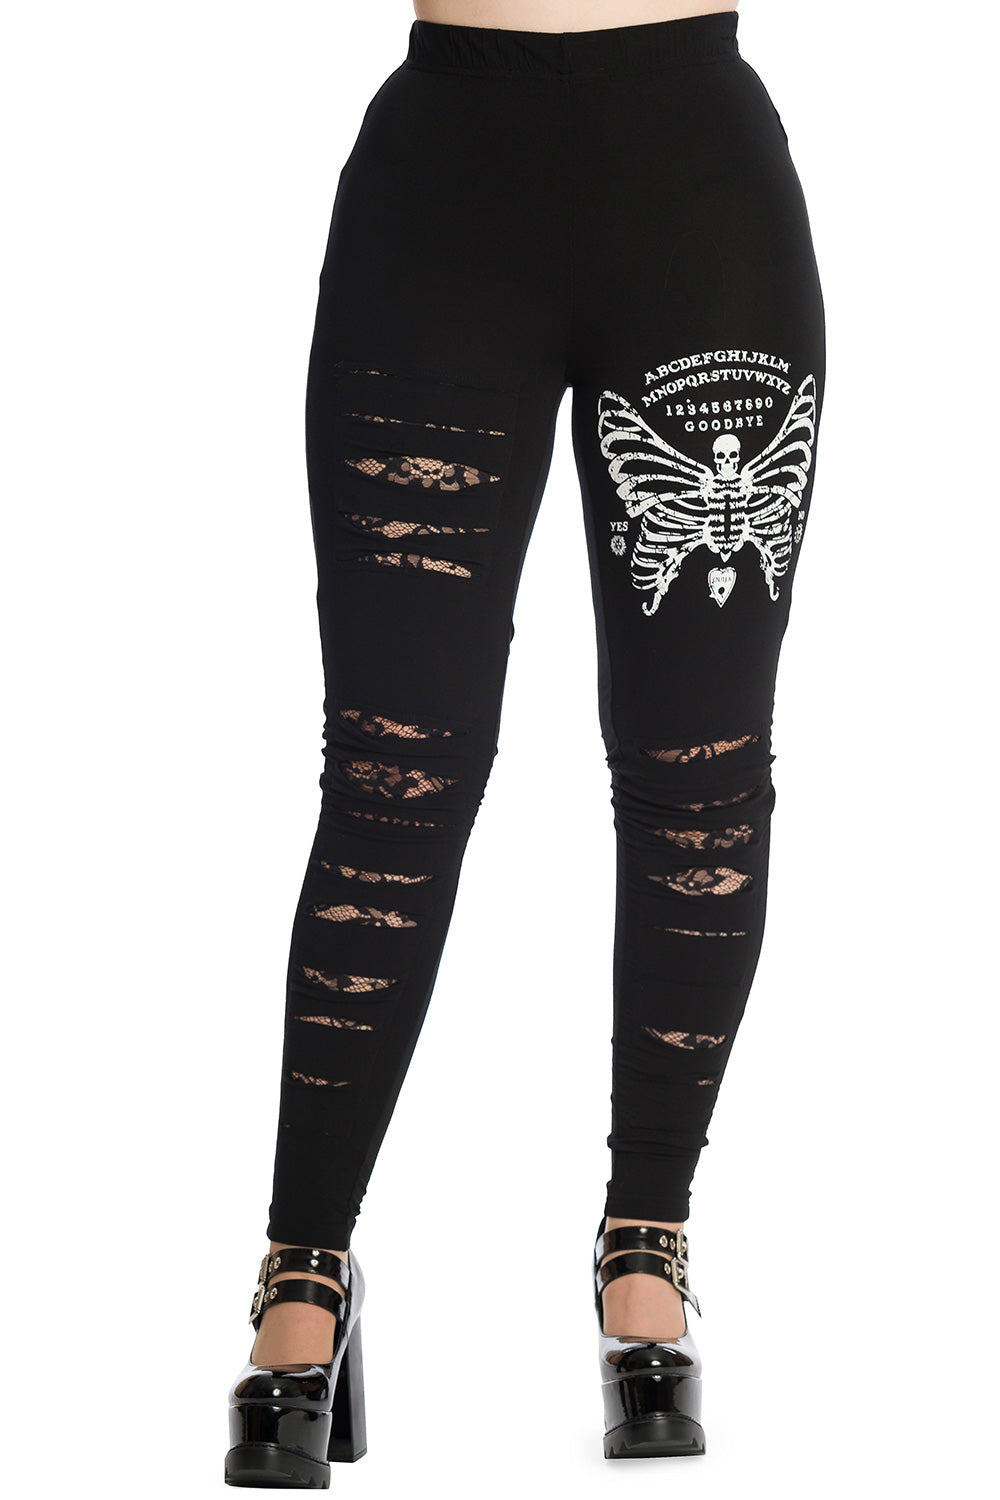 Black Skeleton Butterfly Print Ripped Leggings by Banned